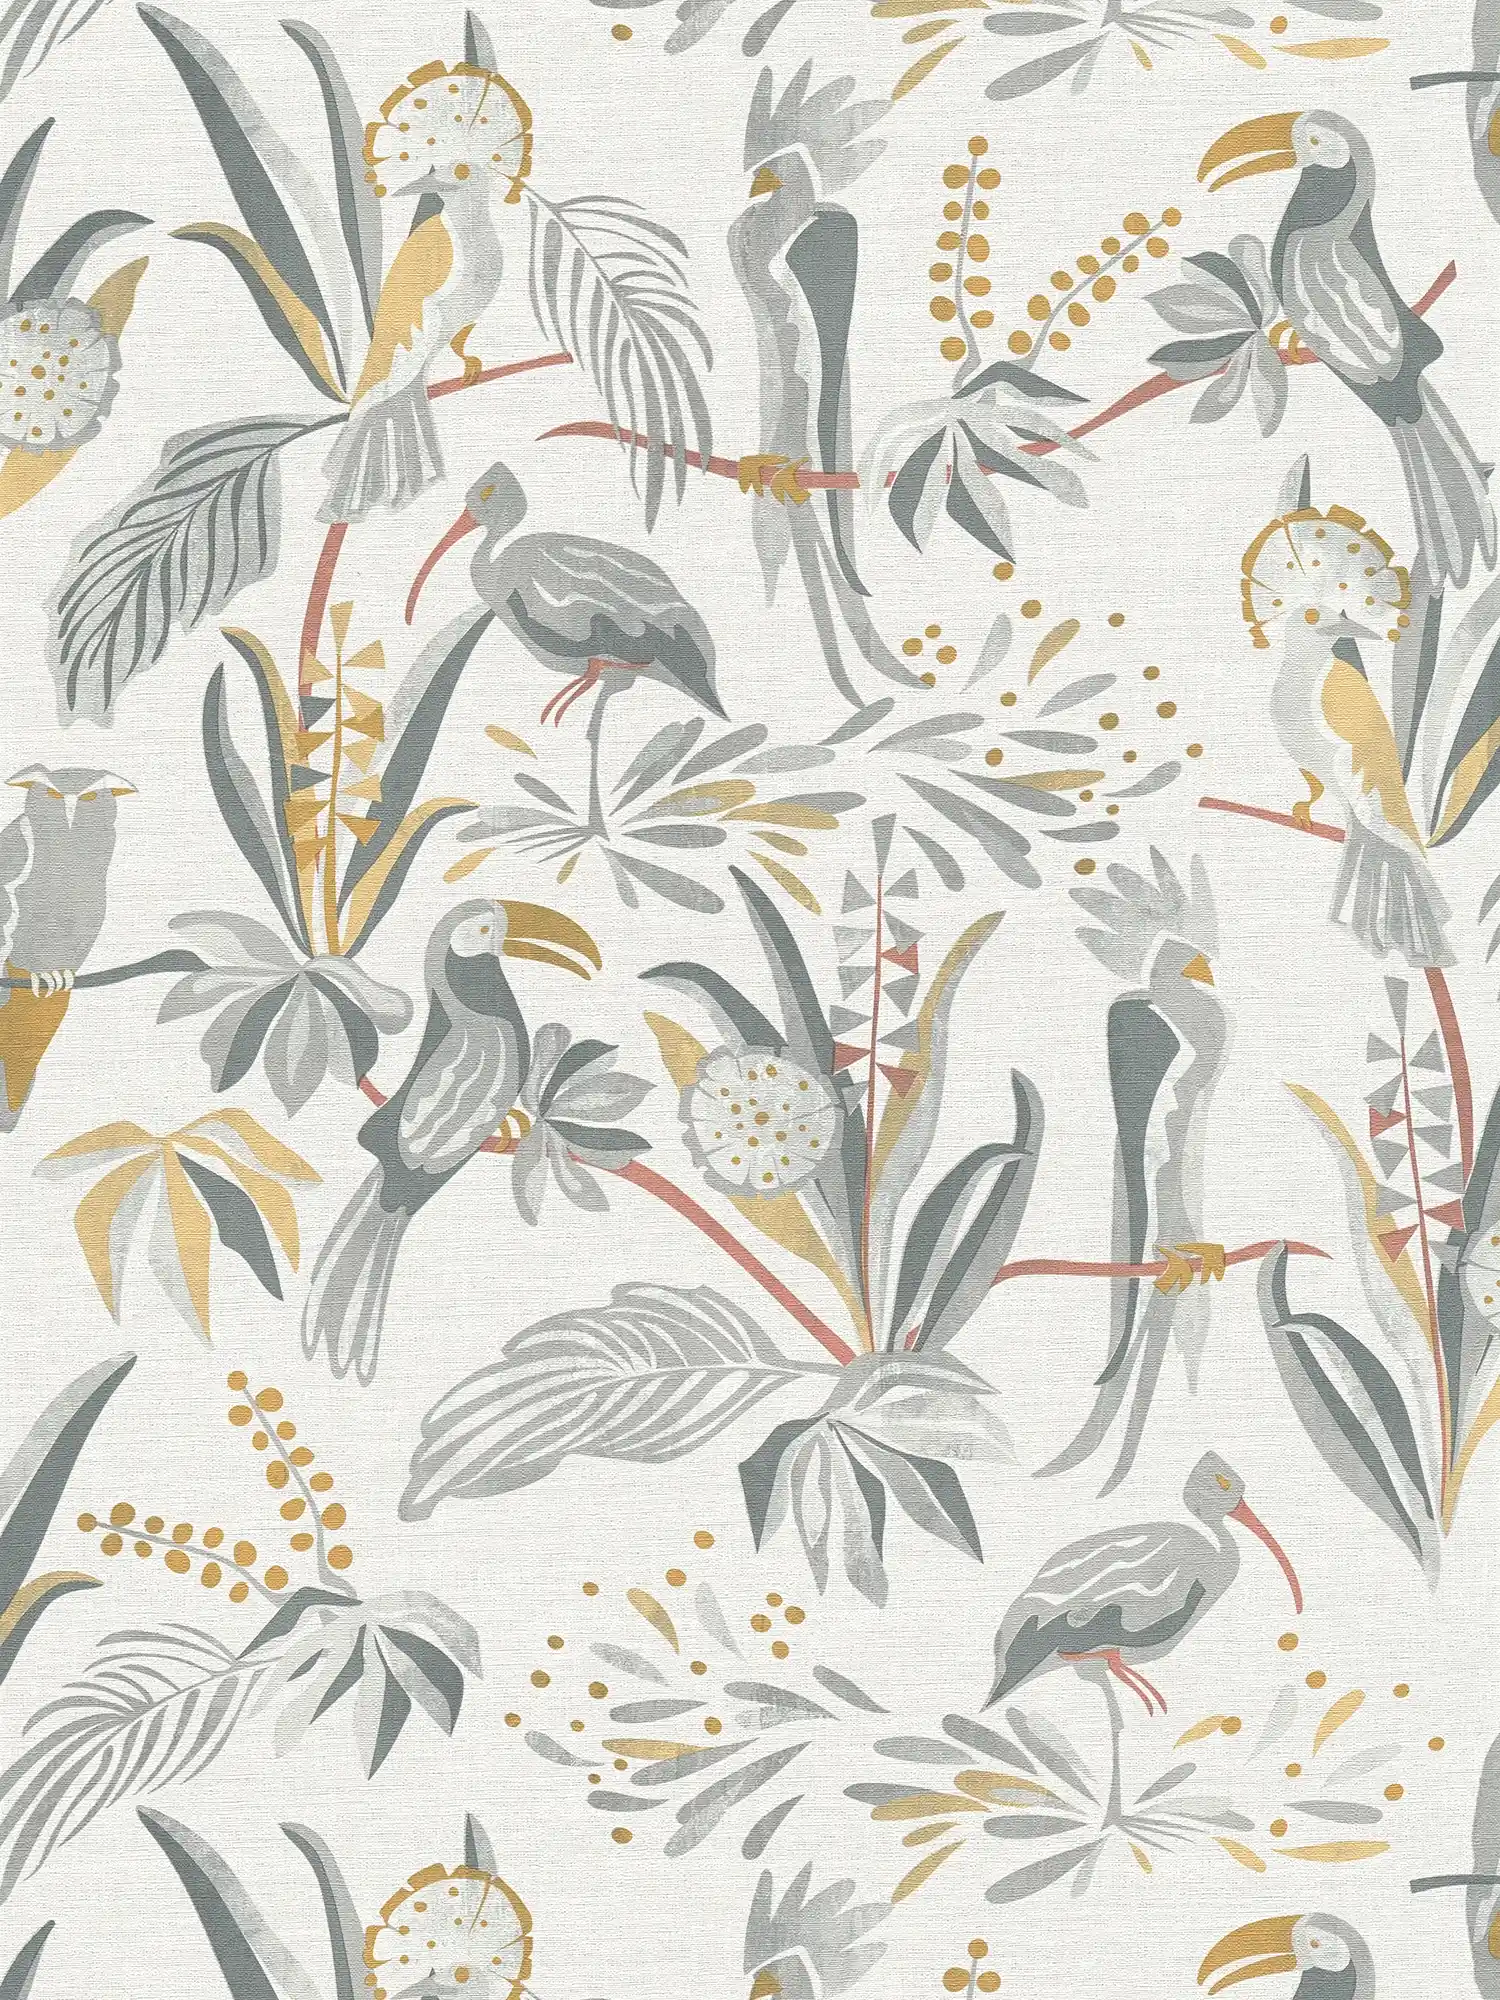 Jungle wallpaper with palm leaves & birds in linen look - grey, gold
